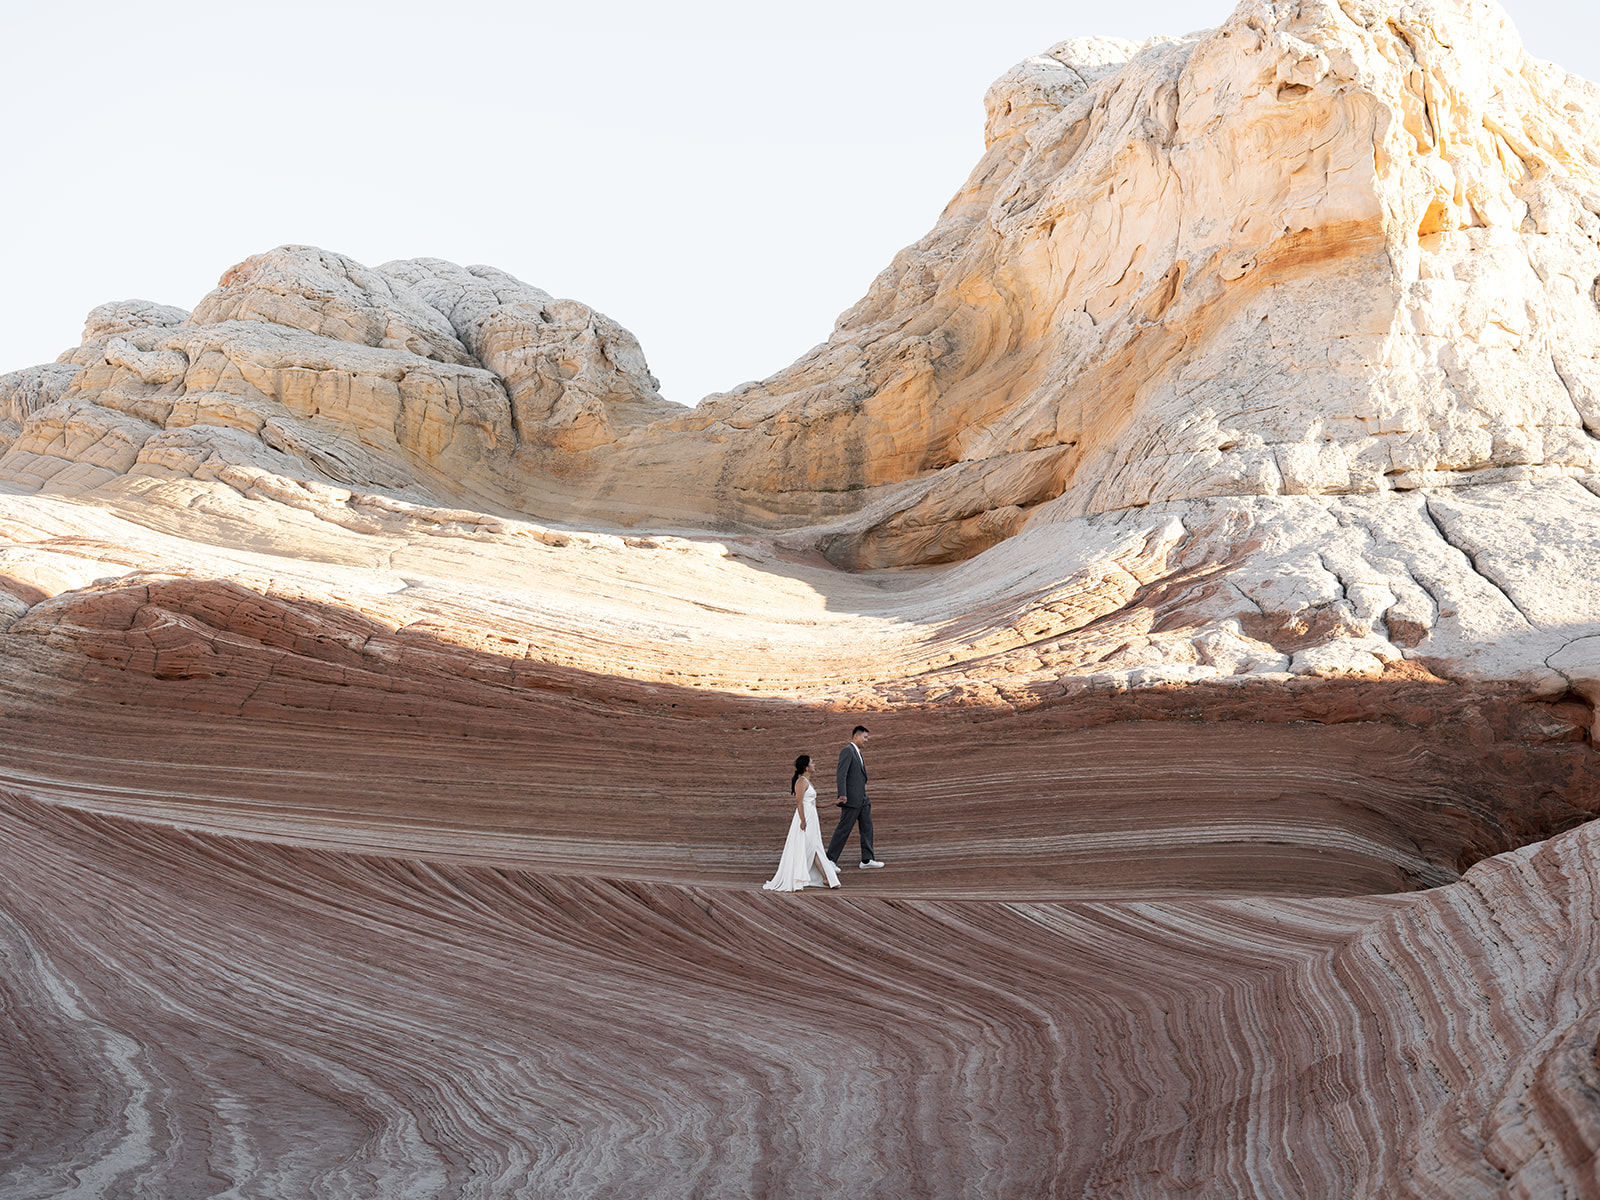 Eloping in a spot that looks like the "wave" 